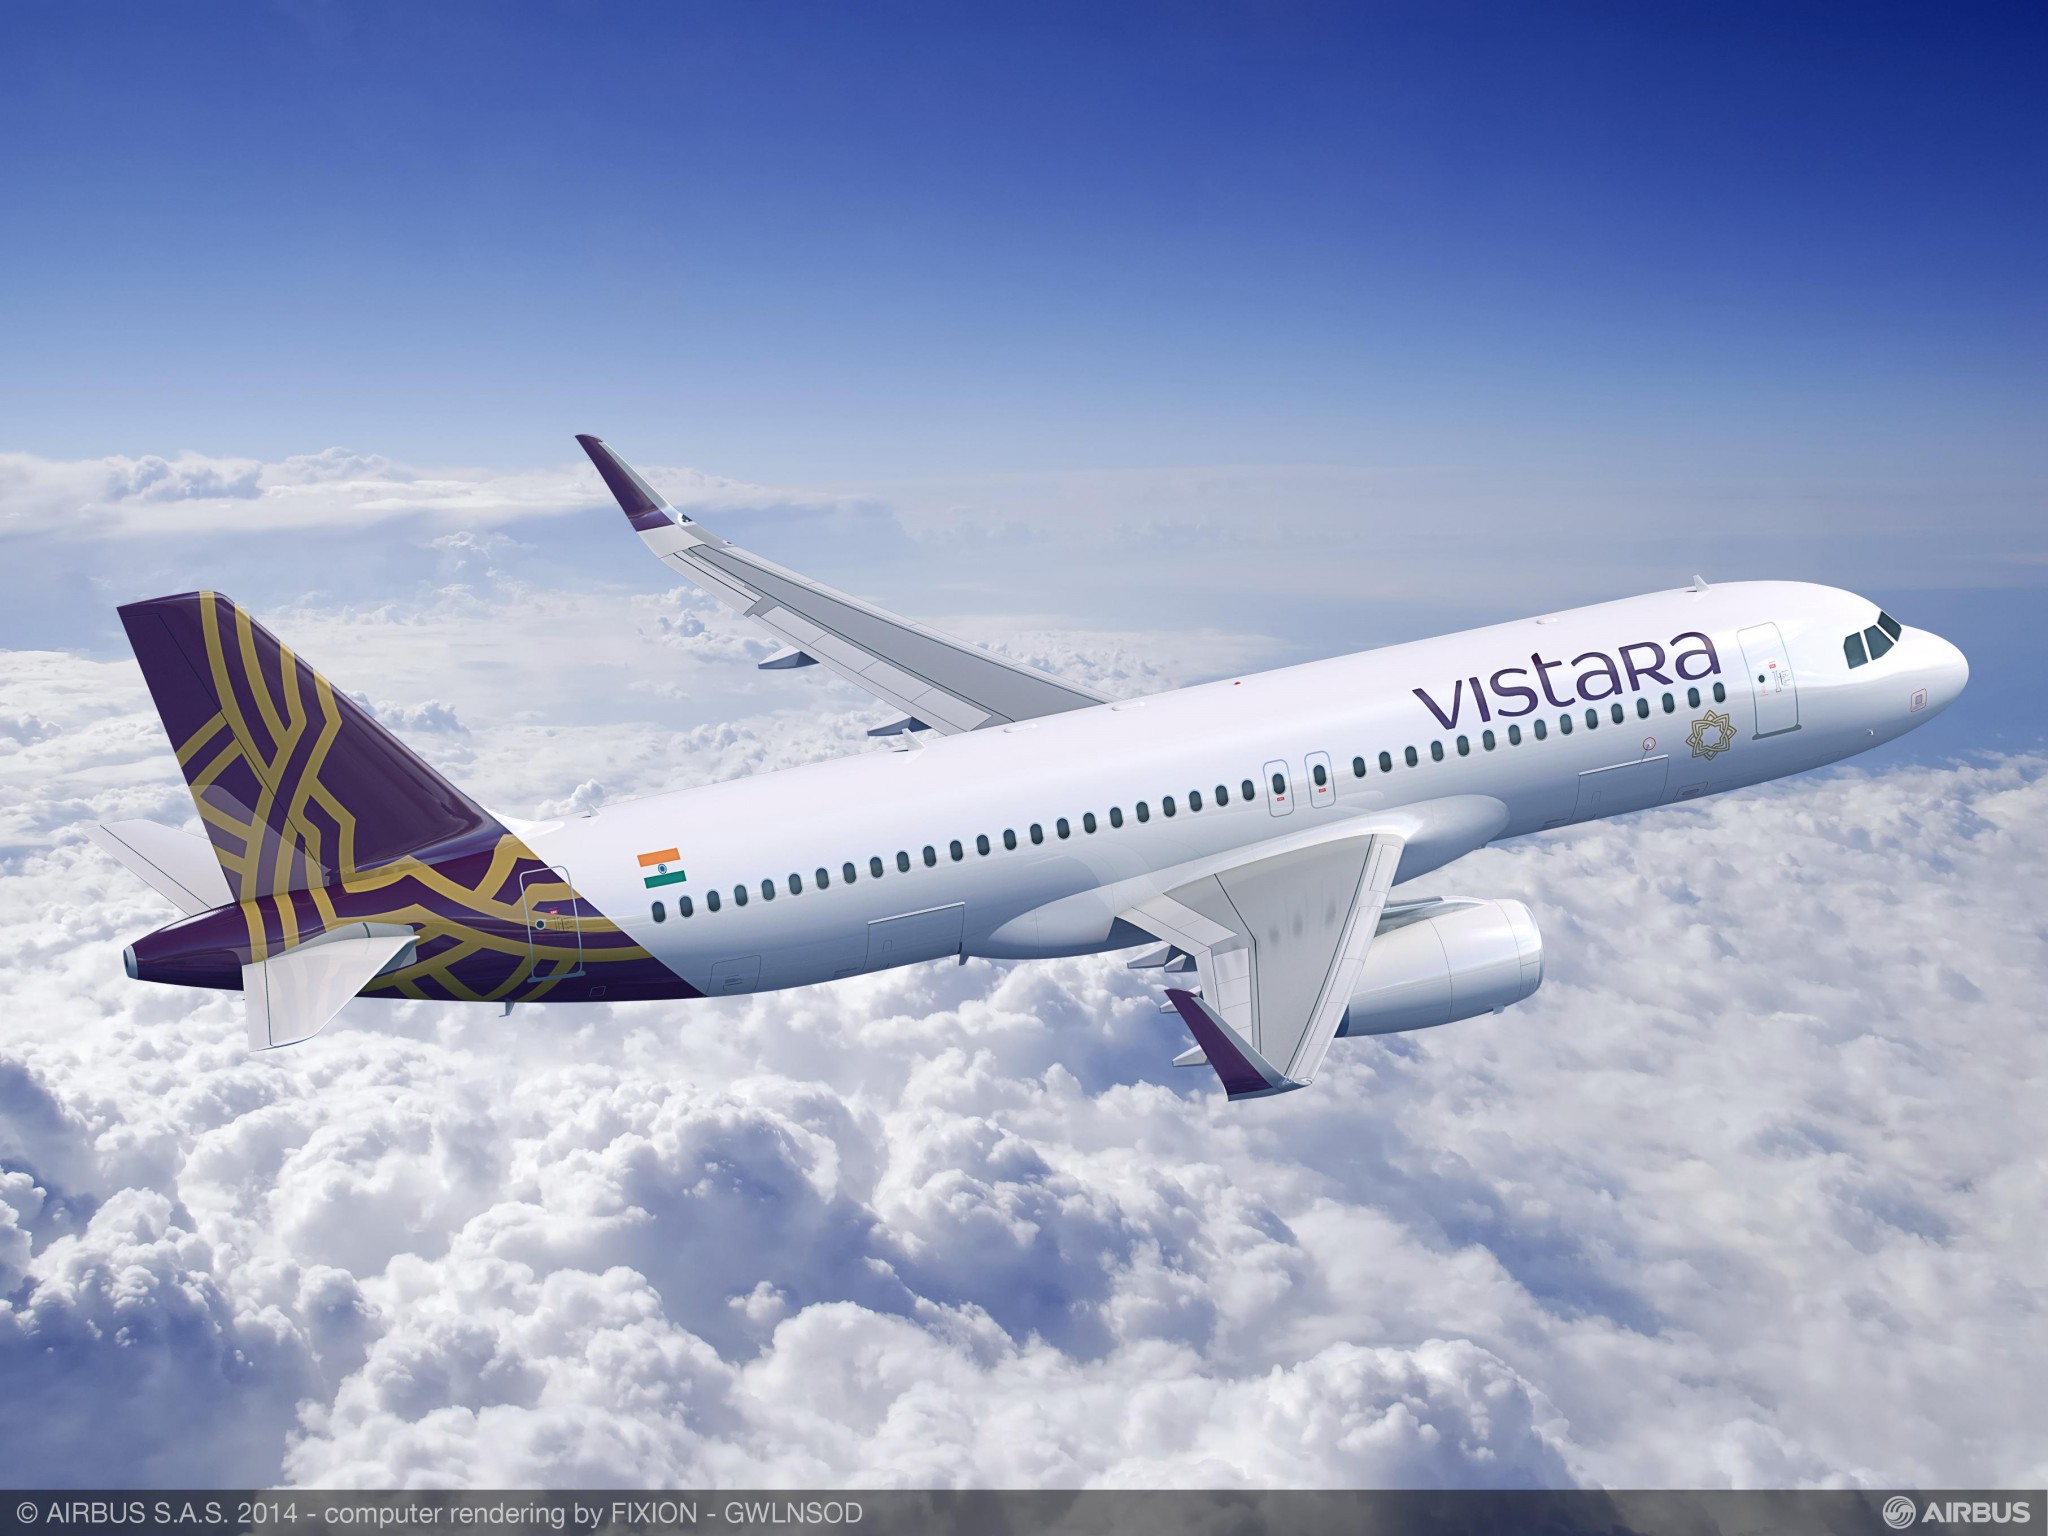 Vistara partners with WorldTicket for flight and rail reservations in single itinerary